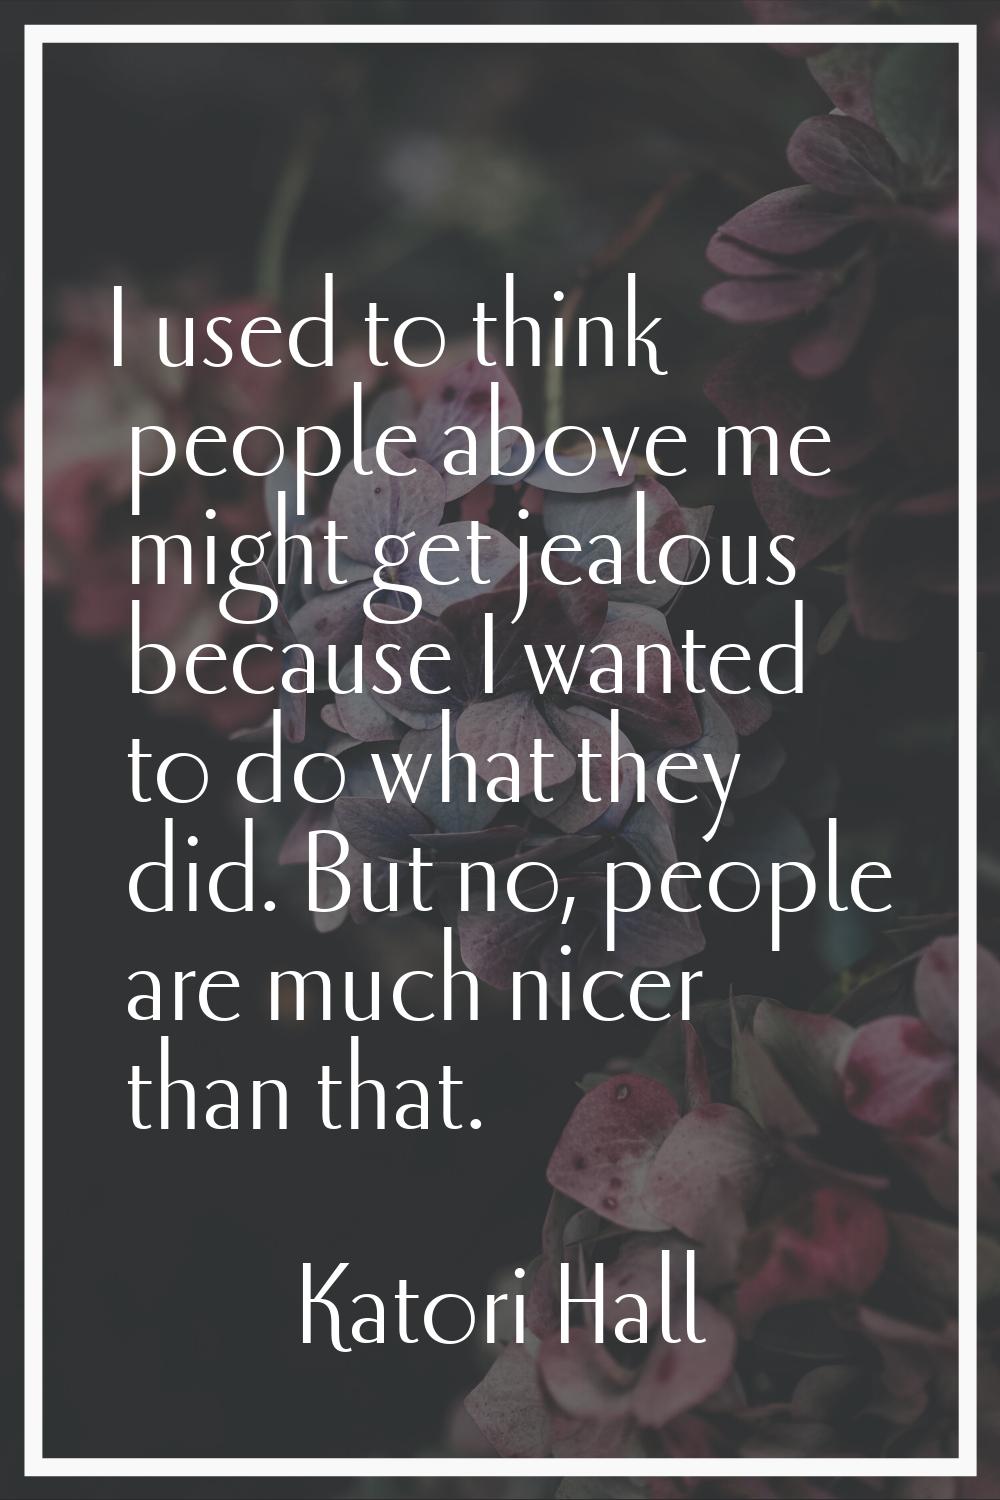 I used to think people above me might get jealous because I wanted to do what they did. But no, peo